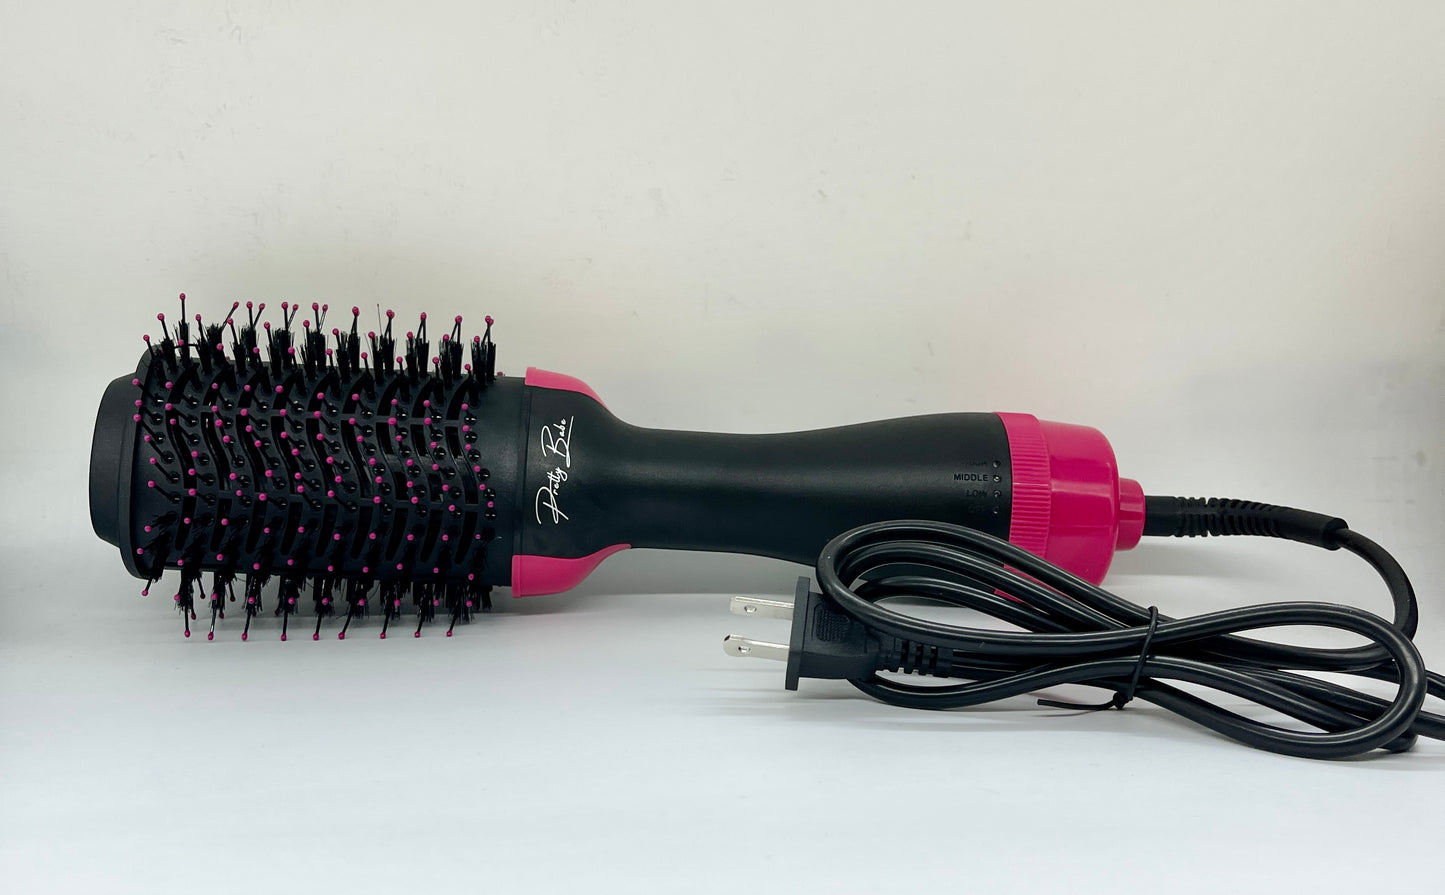 PrettyBabe's 4-in-1 Hair Curling Brush/Blow-Dryer